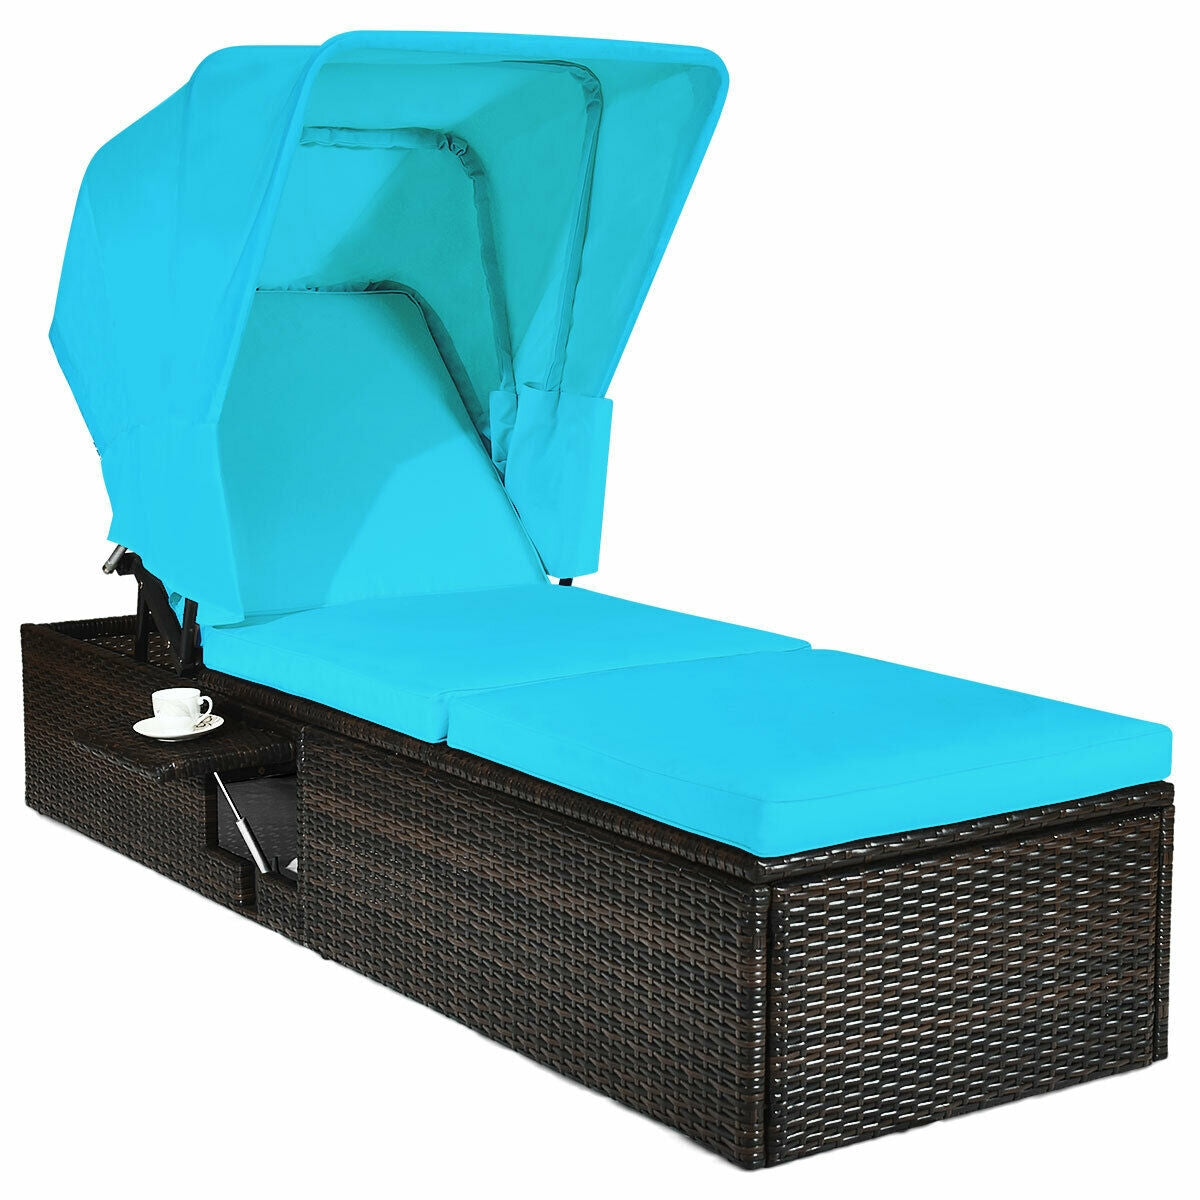 Cedar Outdoor Lounger With Canopy Home Quarters Furnishings